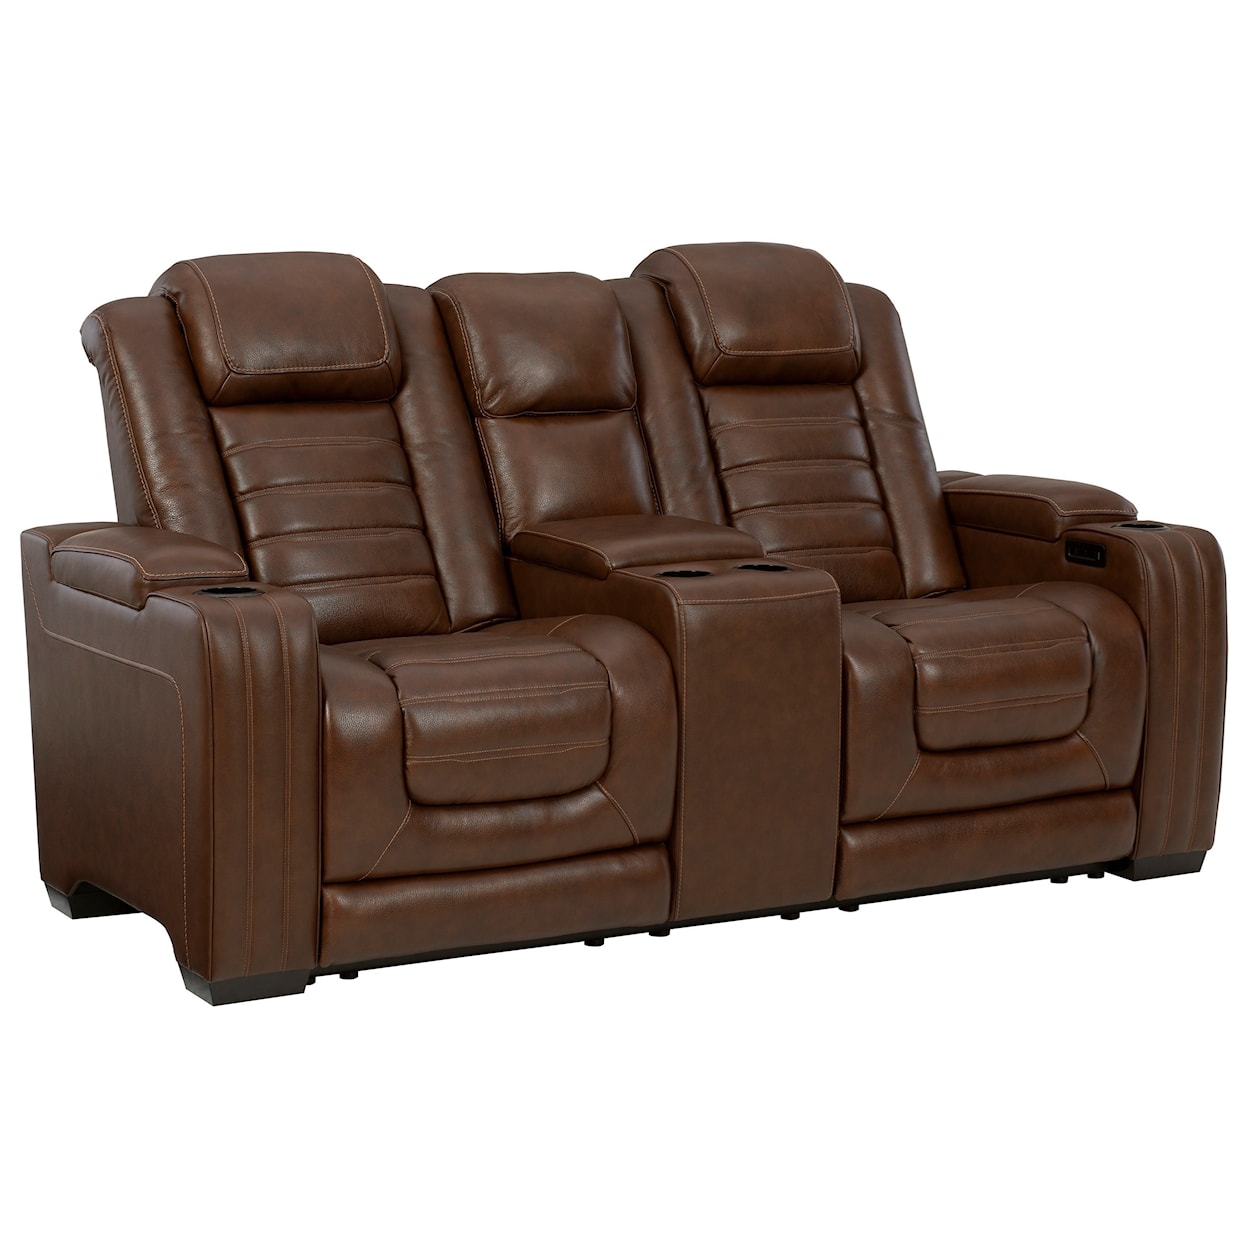 Signature Design by Ashley Furniture Backtrack Power Reclining Loveseat